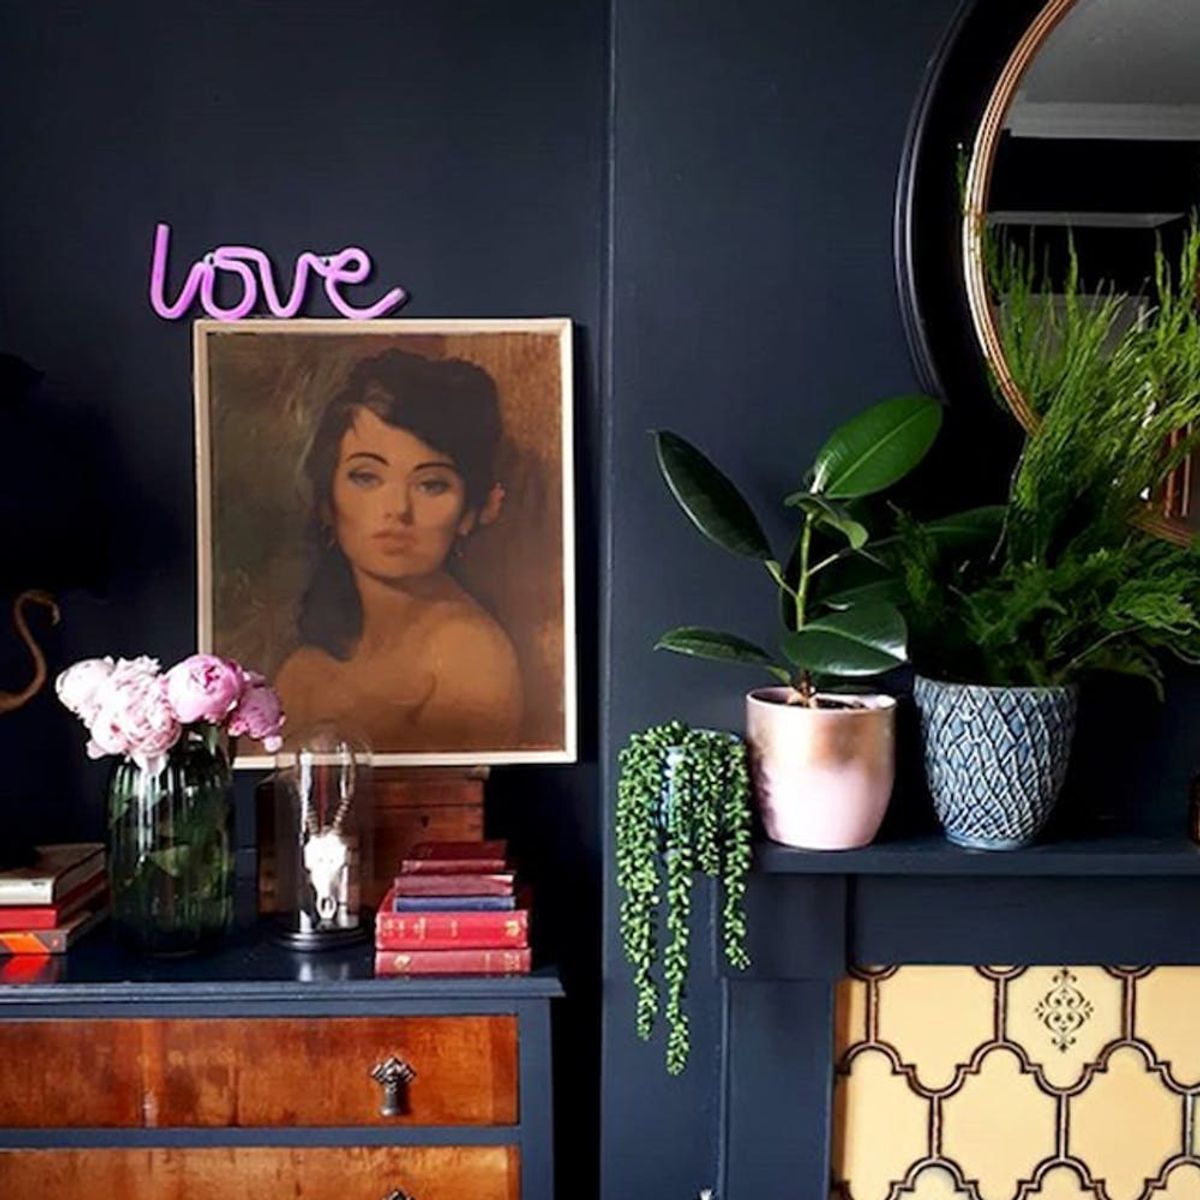 13 Inky-Hued Rooms That Are Moody in the BEST Way